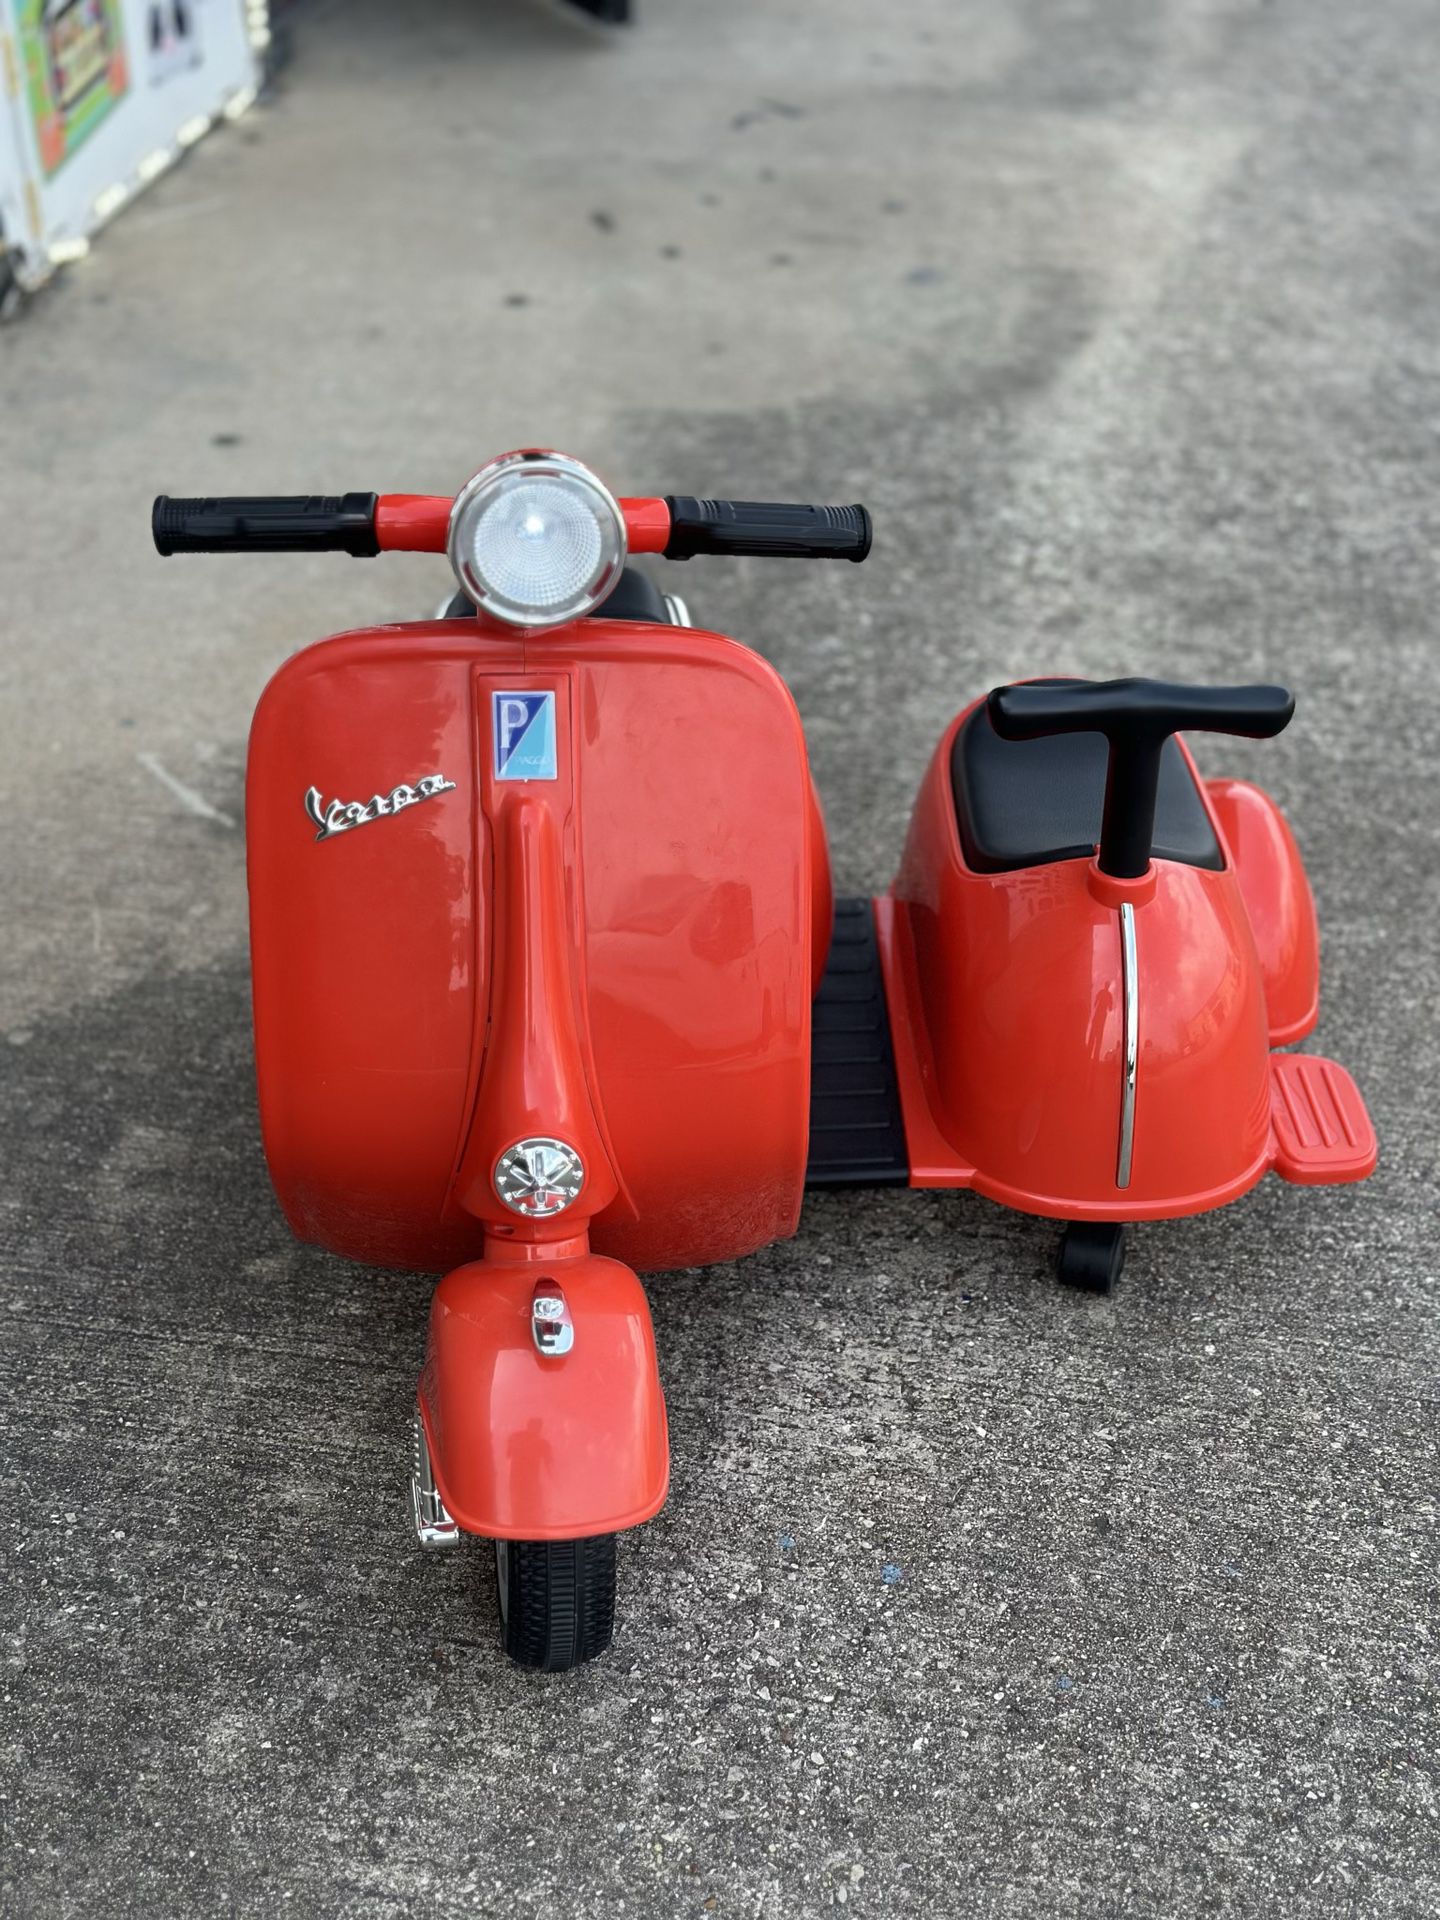  12 Volts Small Vespa With Side Wagon For 2 Kids-Licensed 